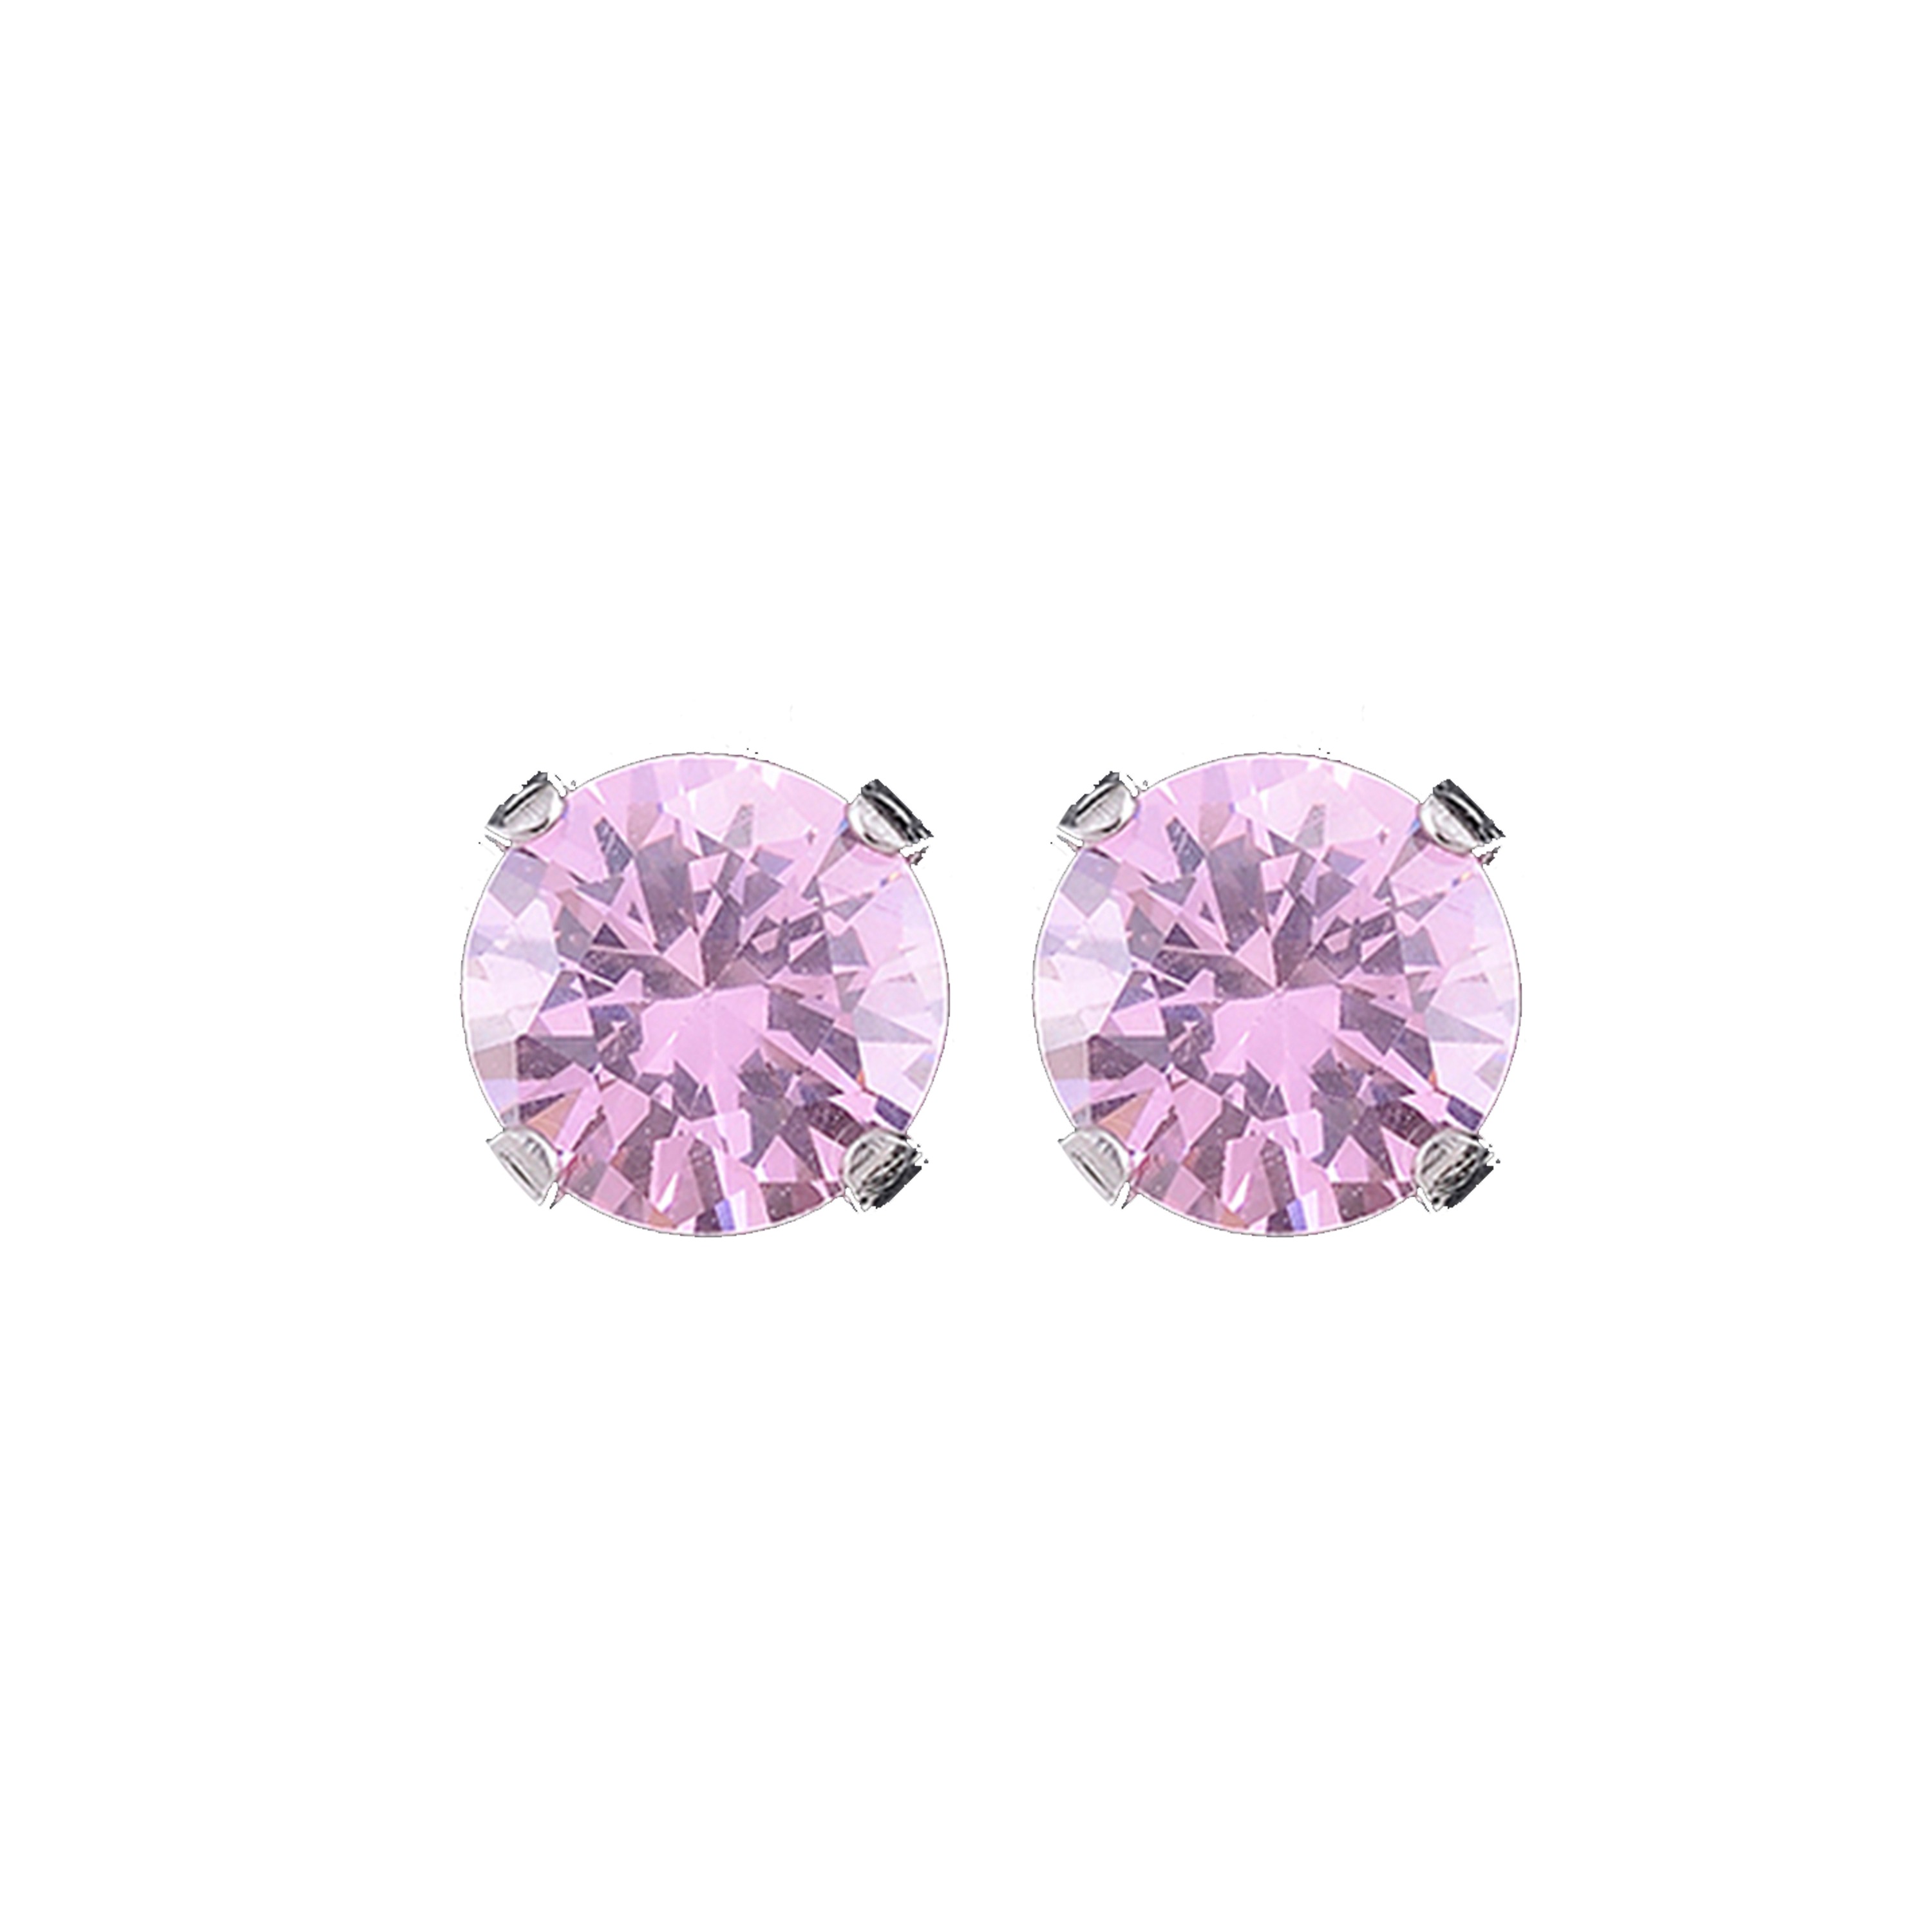 6MM - Cubic Zirconia (Round) - Light Pink | Stainless Steel Simple Yet Stylish, Cute & Trending Fashion Earrings / Ear Studs for Girls & Women Online @ Pakistan | Studex Sensitive (for daily wear)